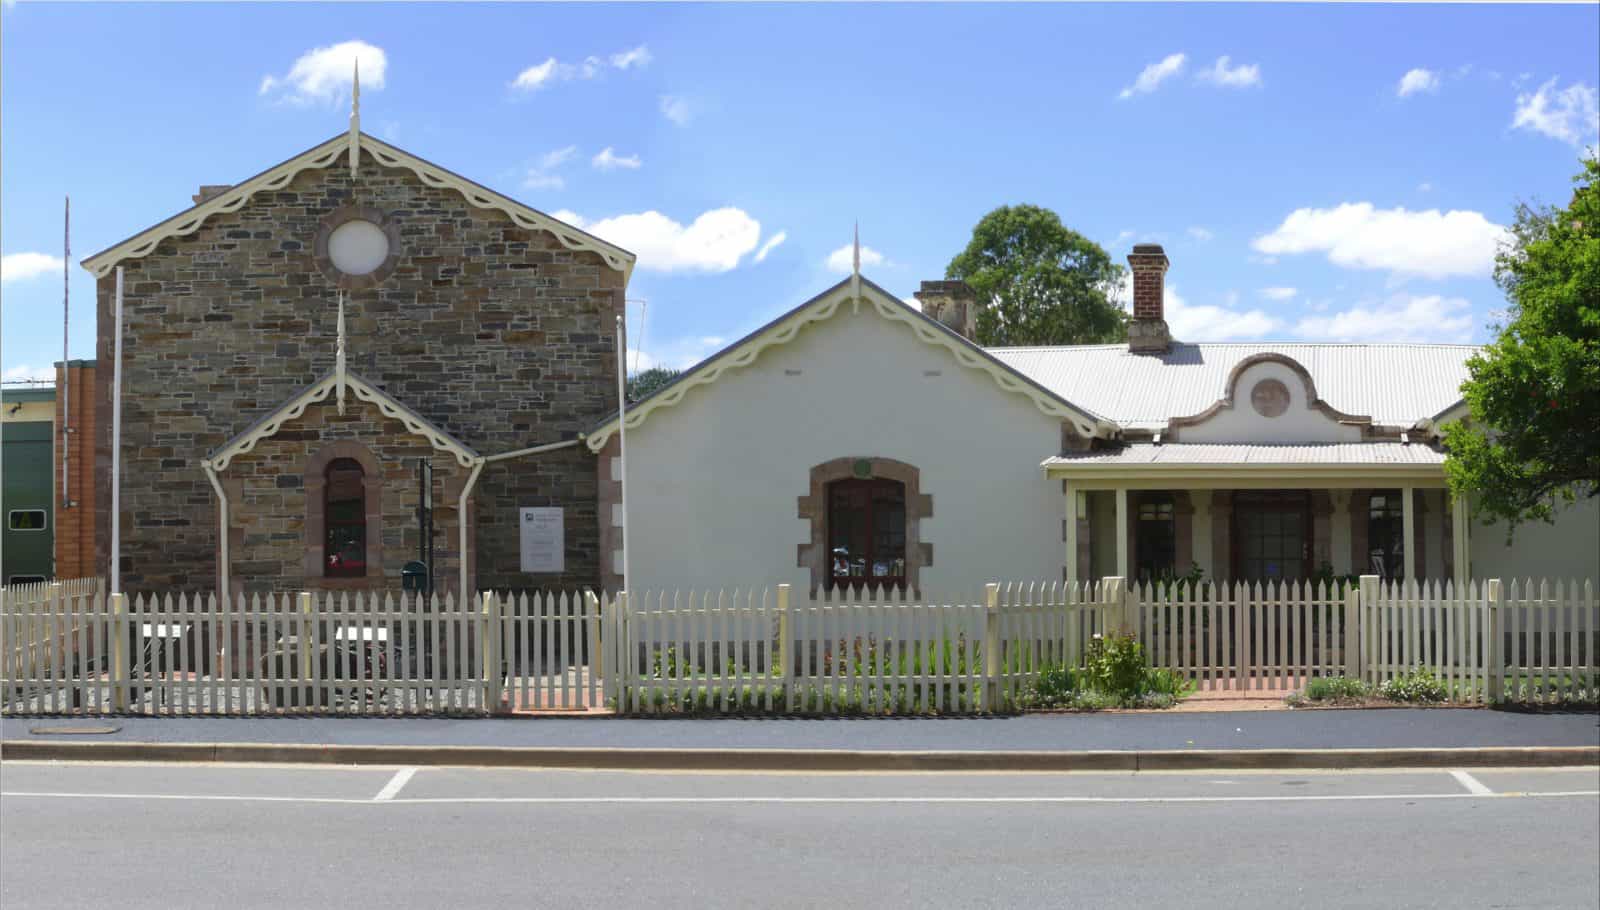 The Strathalbyn Museum since 1974